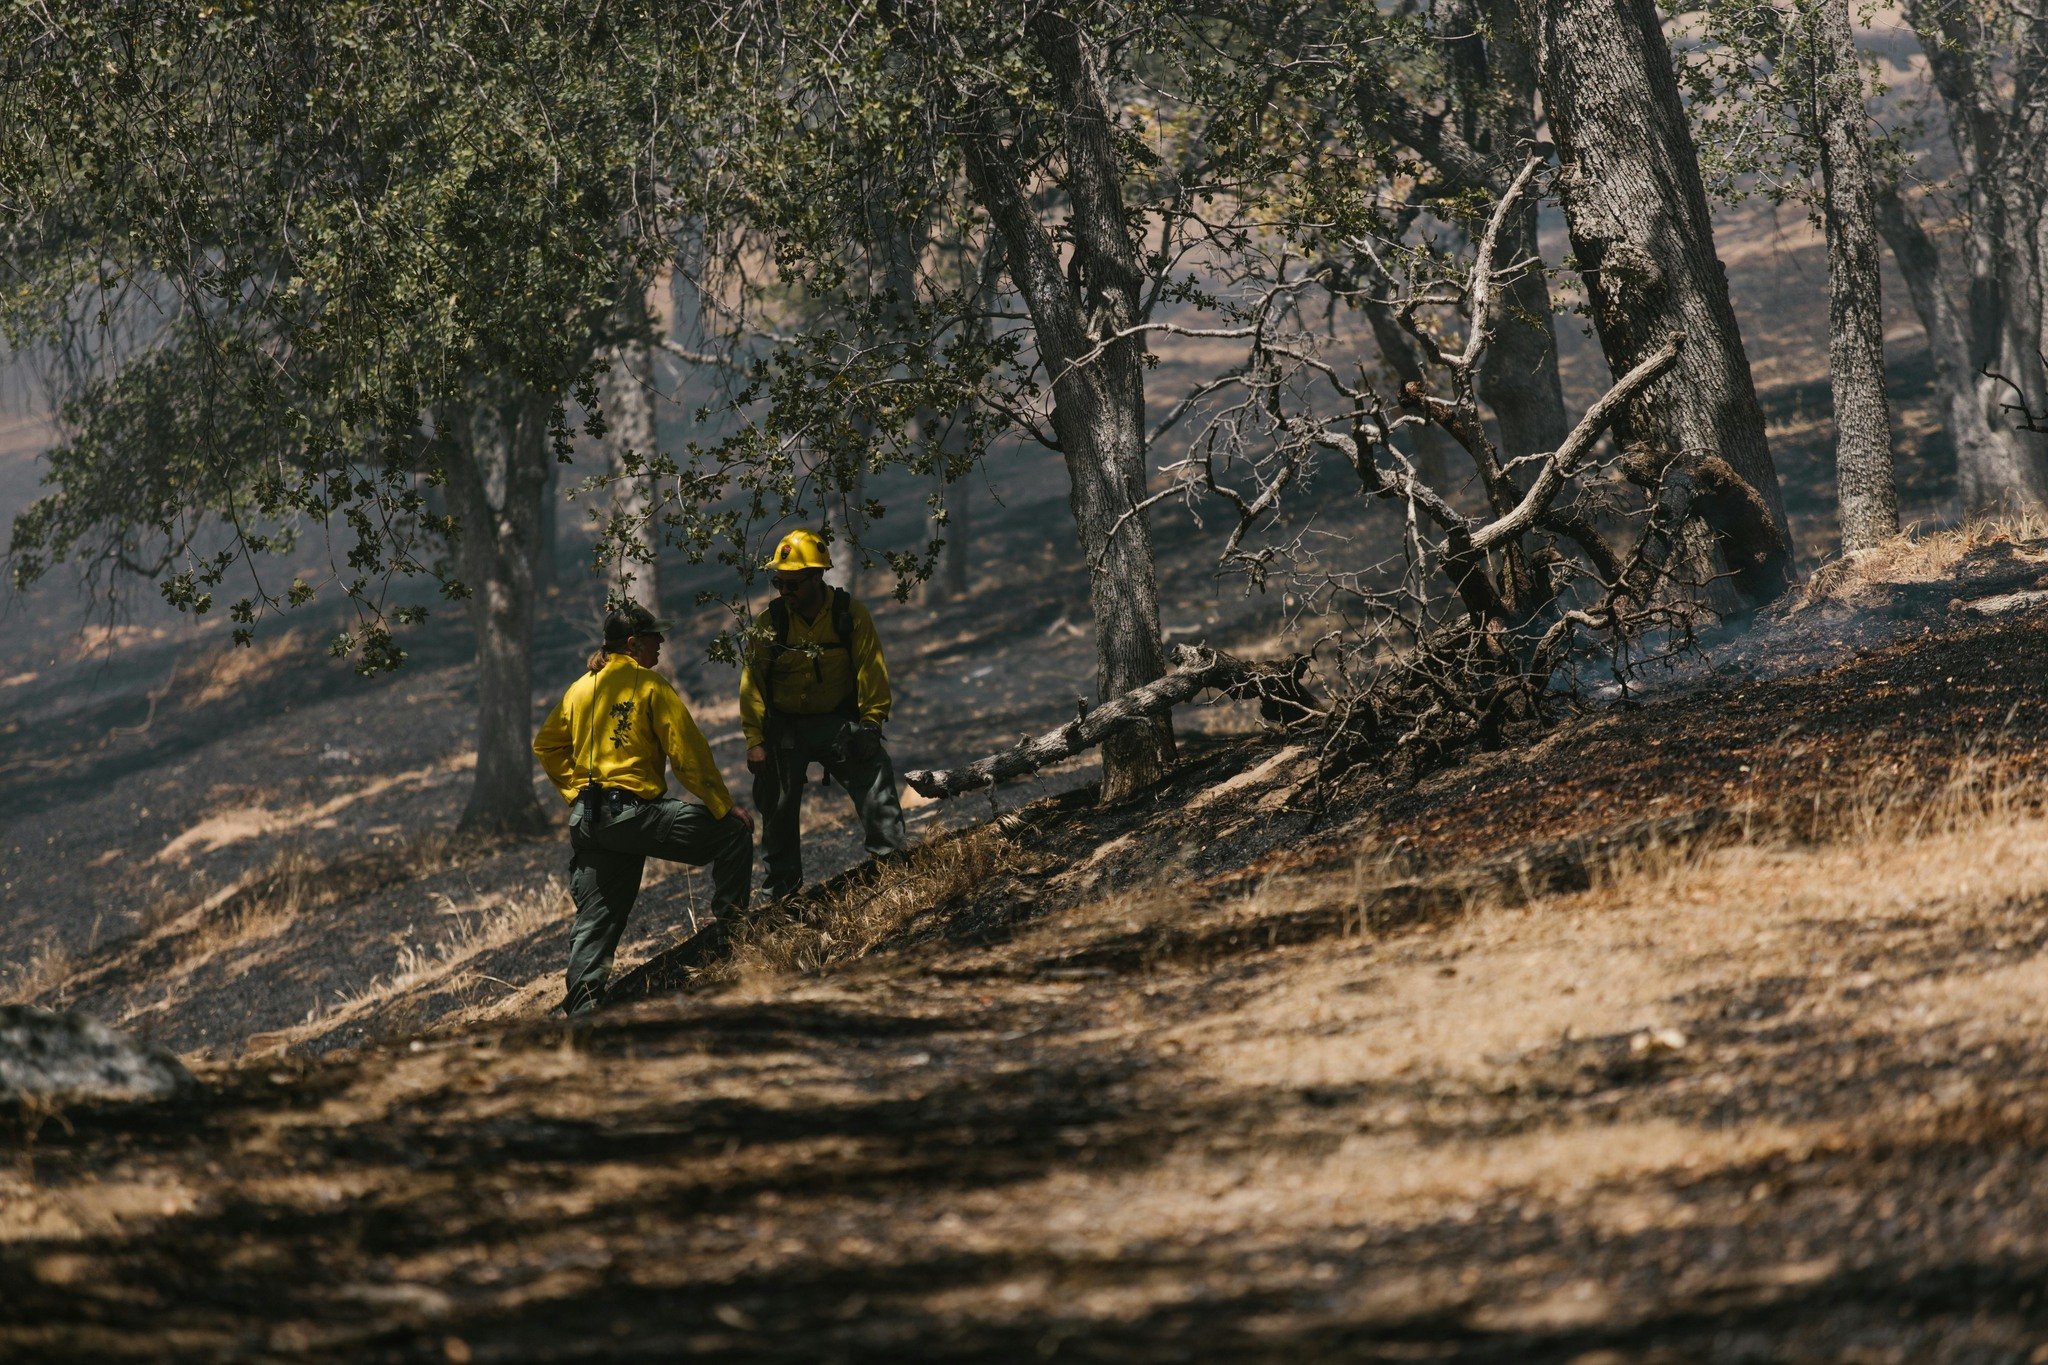 Facing the flames, protecting our future. 💪

Thank you, wildland firefighters, for your commitment to keeping our communities safe from wildfires.

#ProtectingOurLands 
#EssentialProfession
#CrewBossPPE